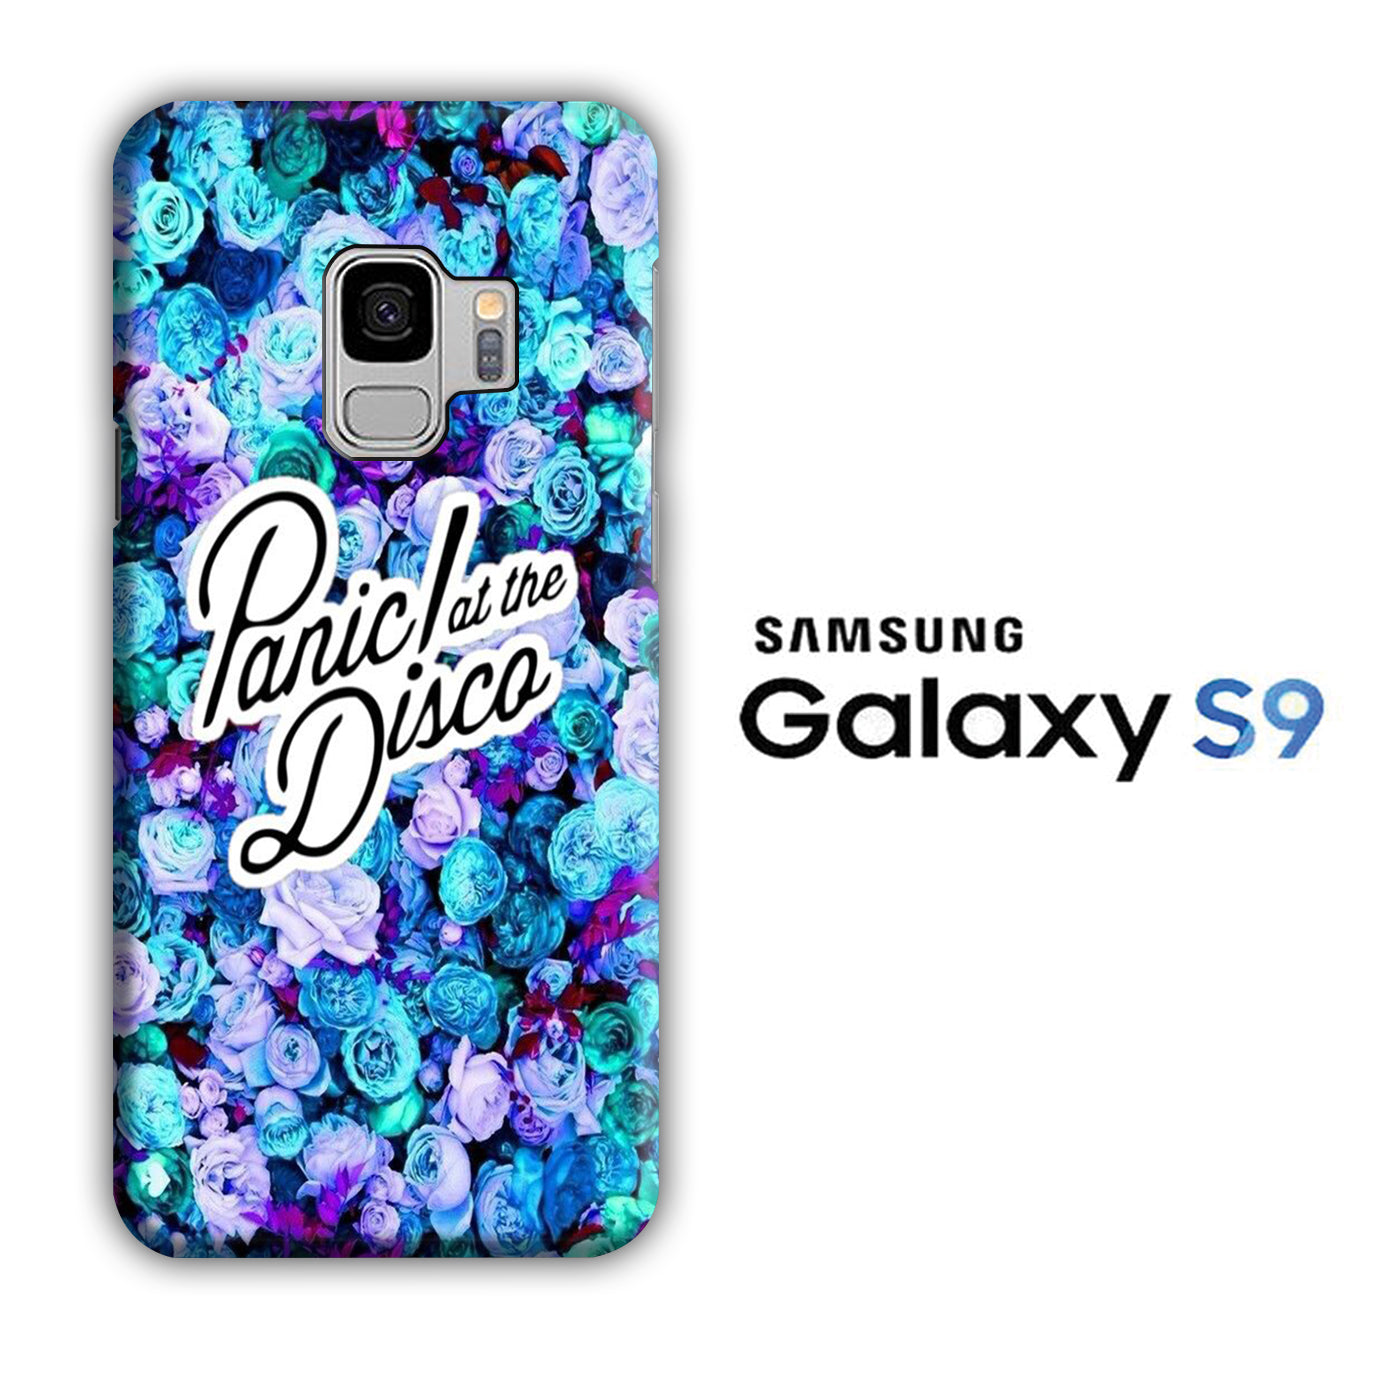 Band Panic at The Disco 001 Samsung Galaxy S9 3D Case - cleverny